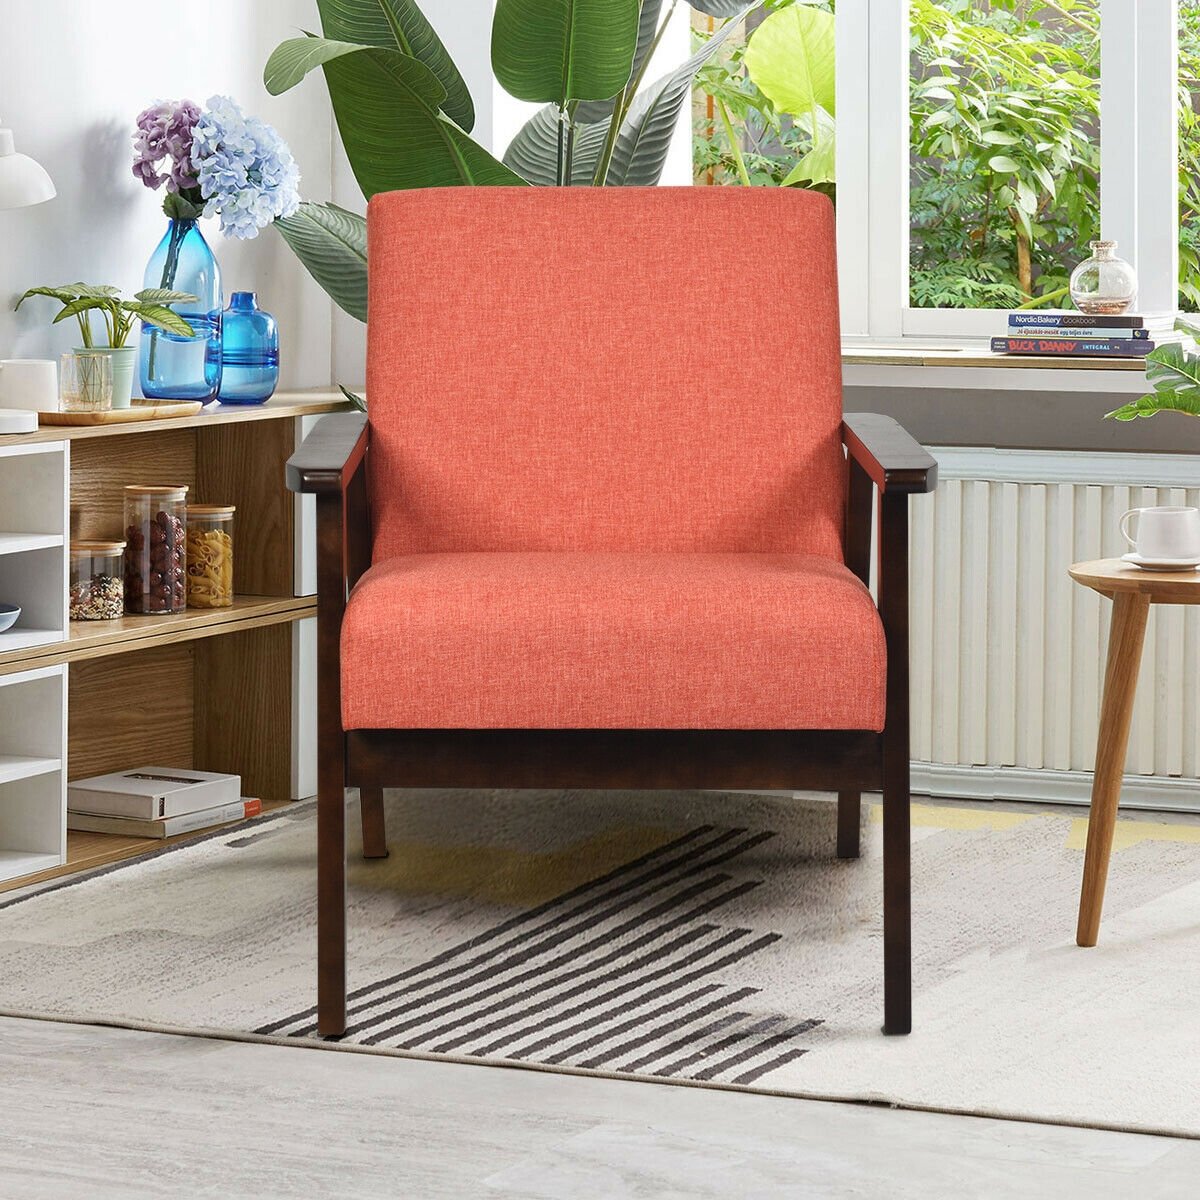 Solid Rubber Wood Fabric Accent Armchair, Orange - Gallery Canada